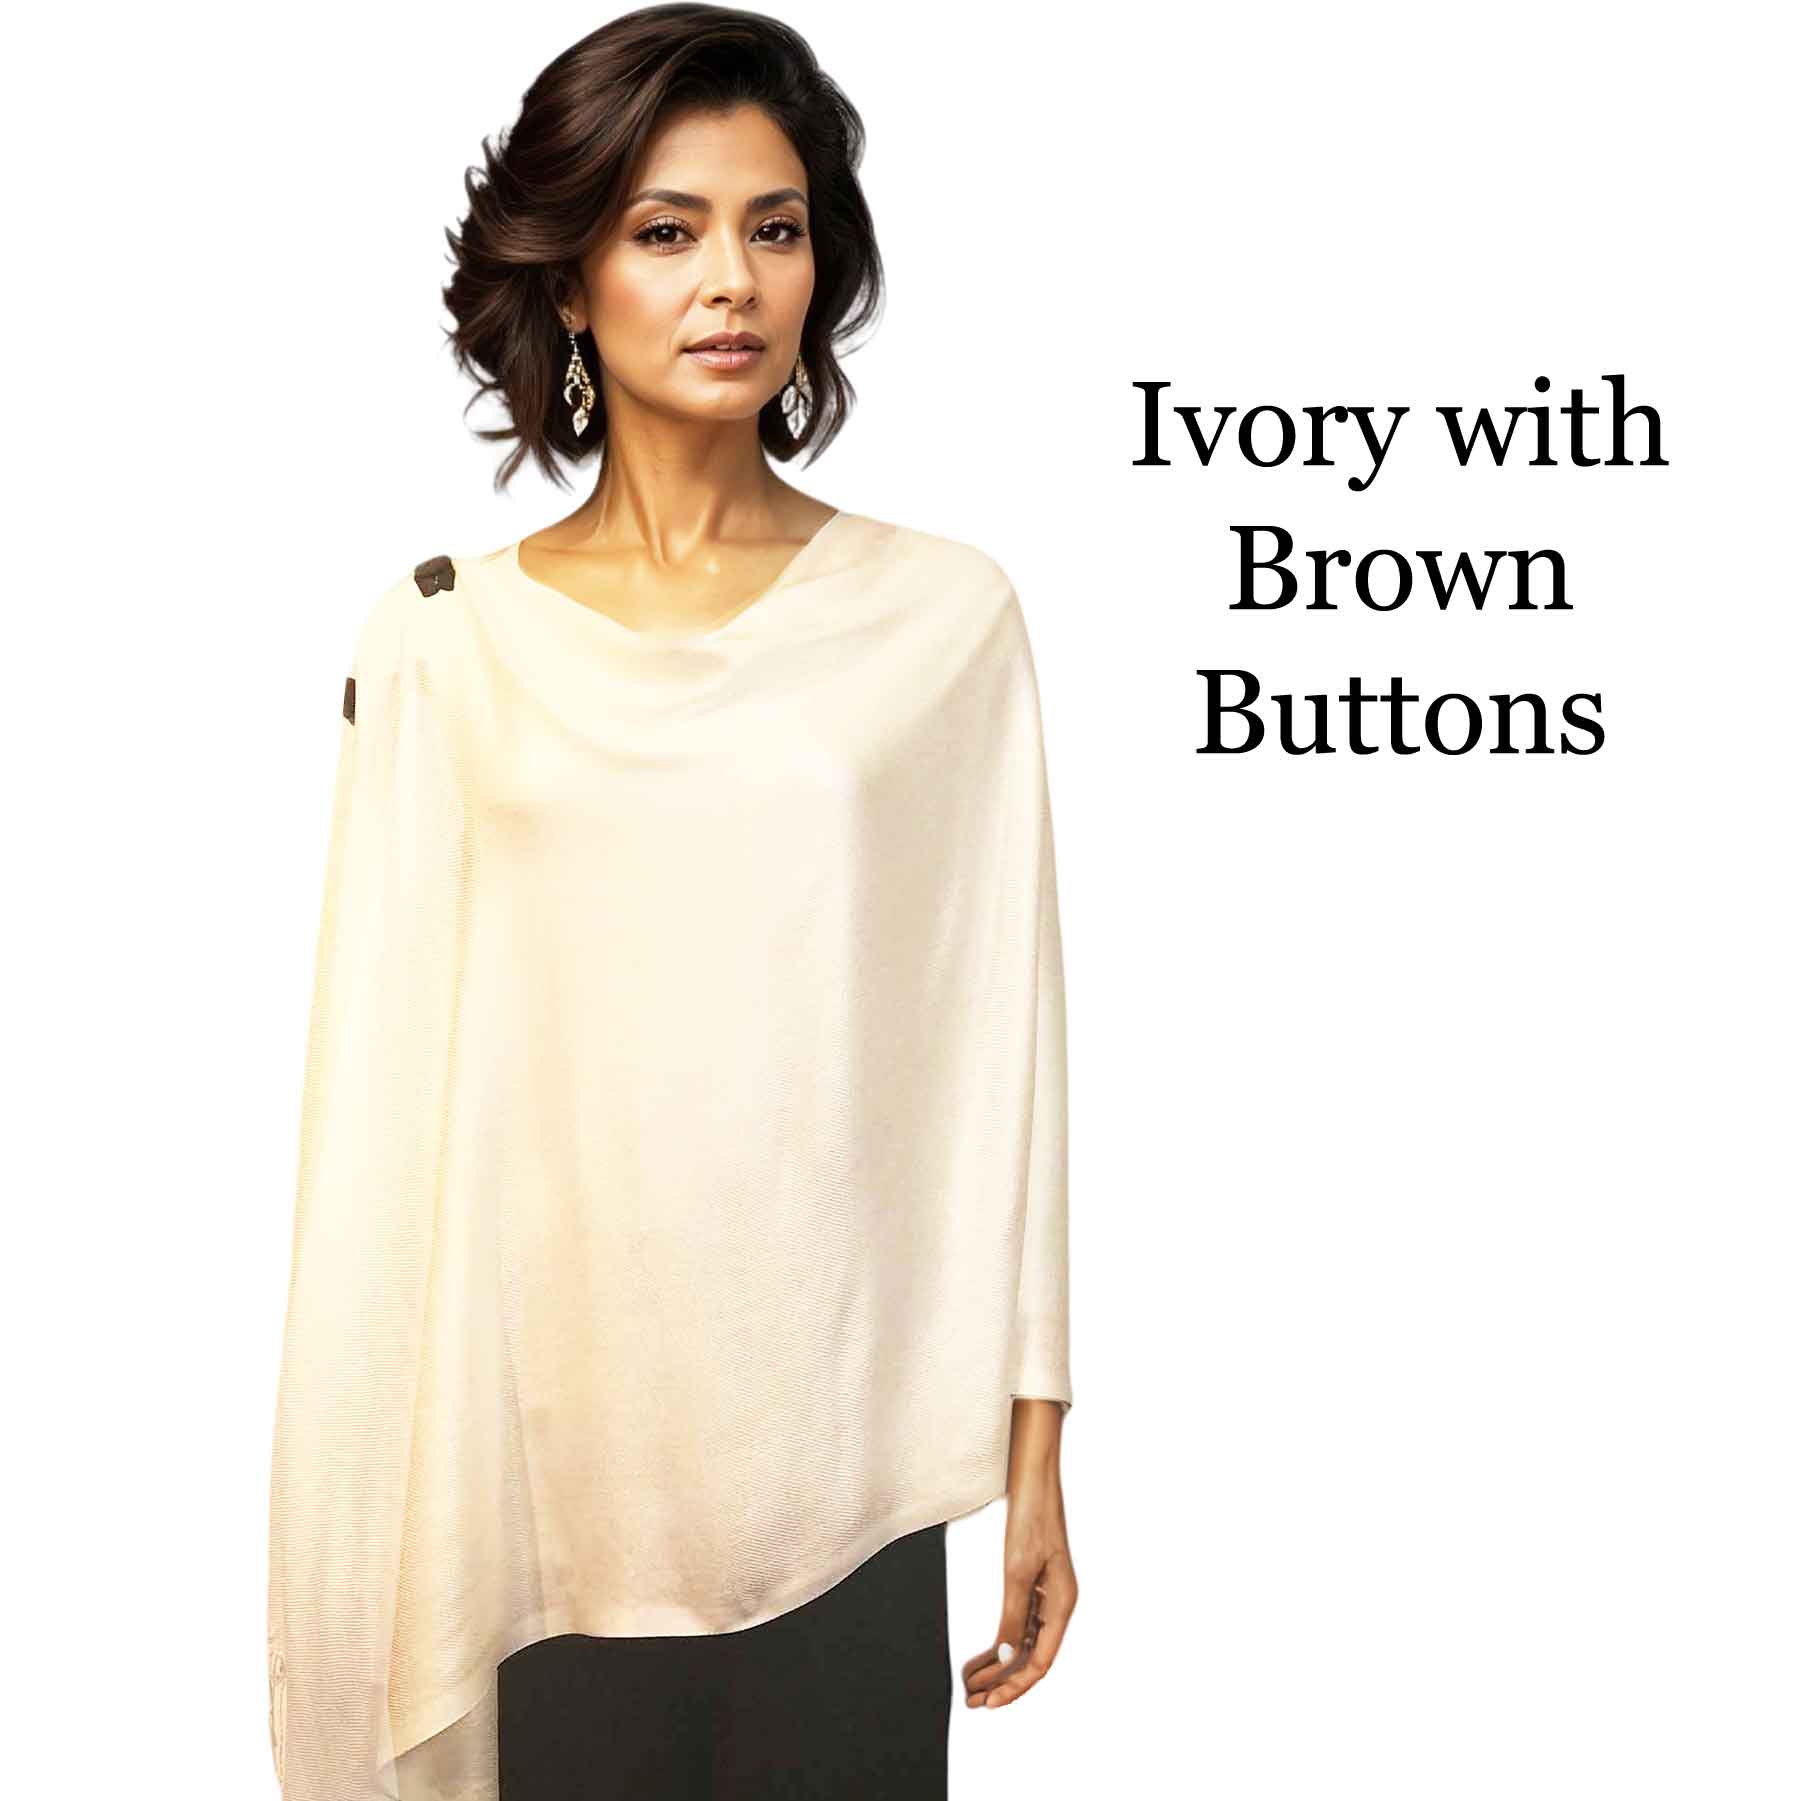 Solid Ivory<br>
Pashmina Style Button Shawl